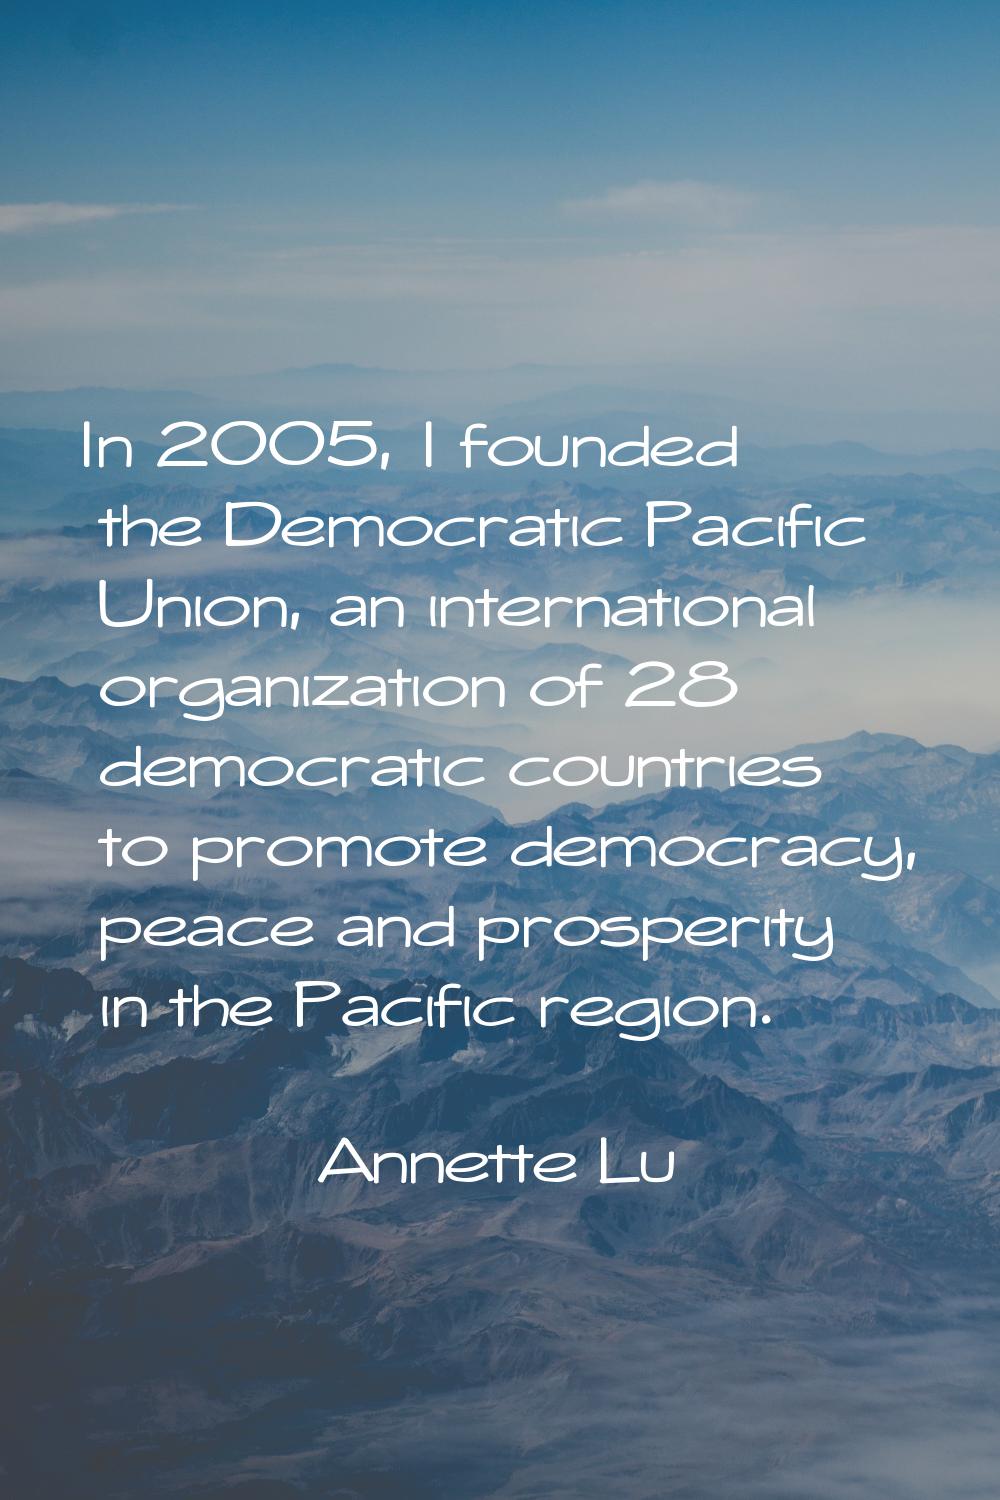 In 2005, I founded the Democratic Pacific Union, an international organization of 28 democratic cou